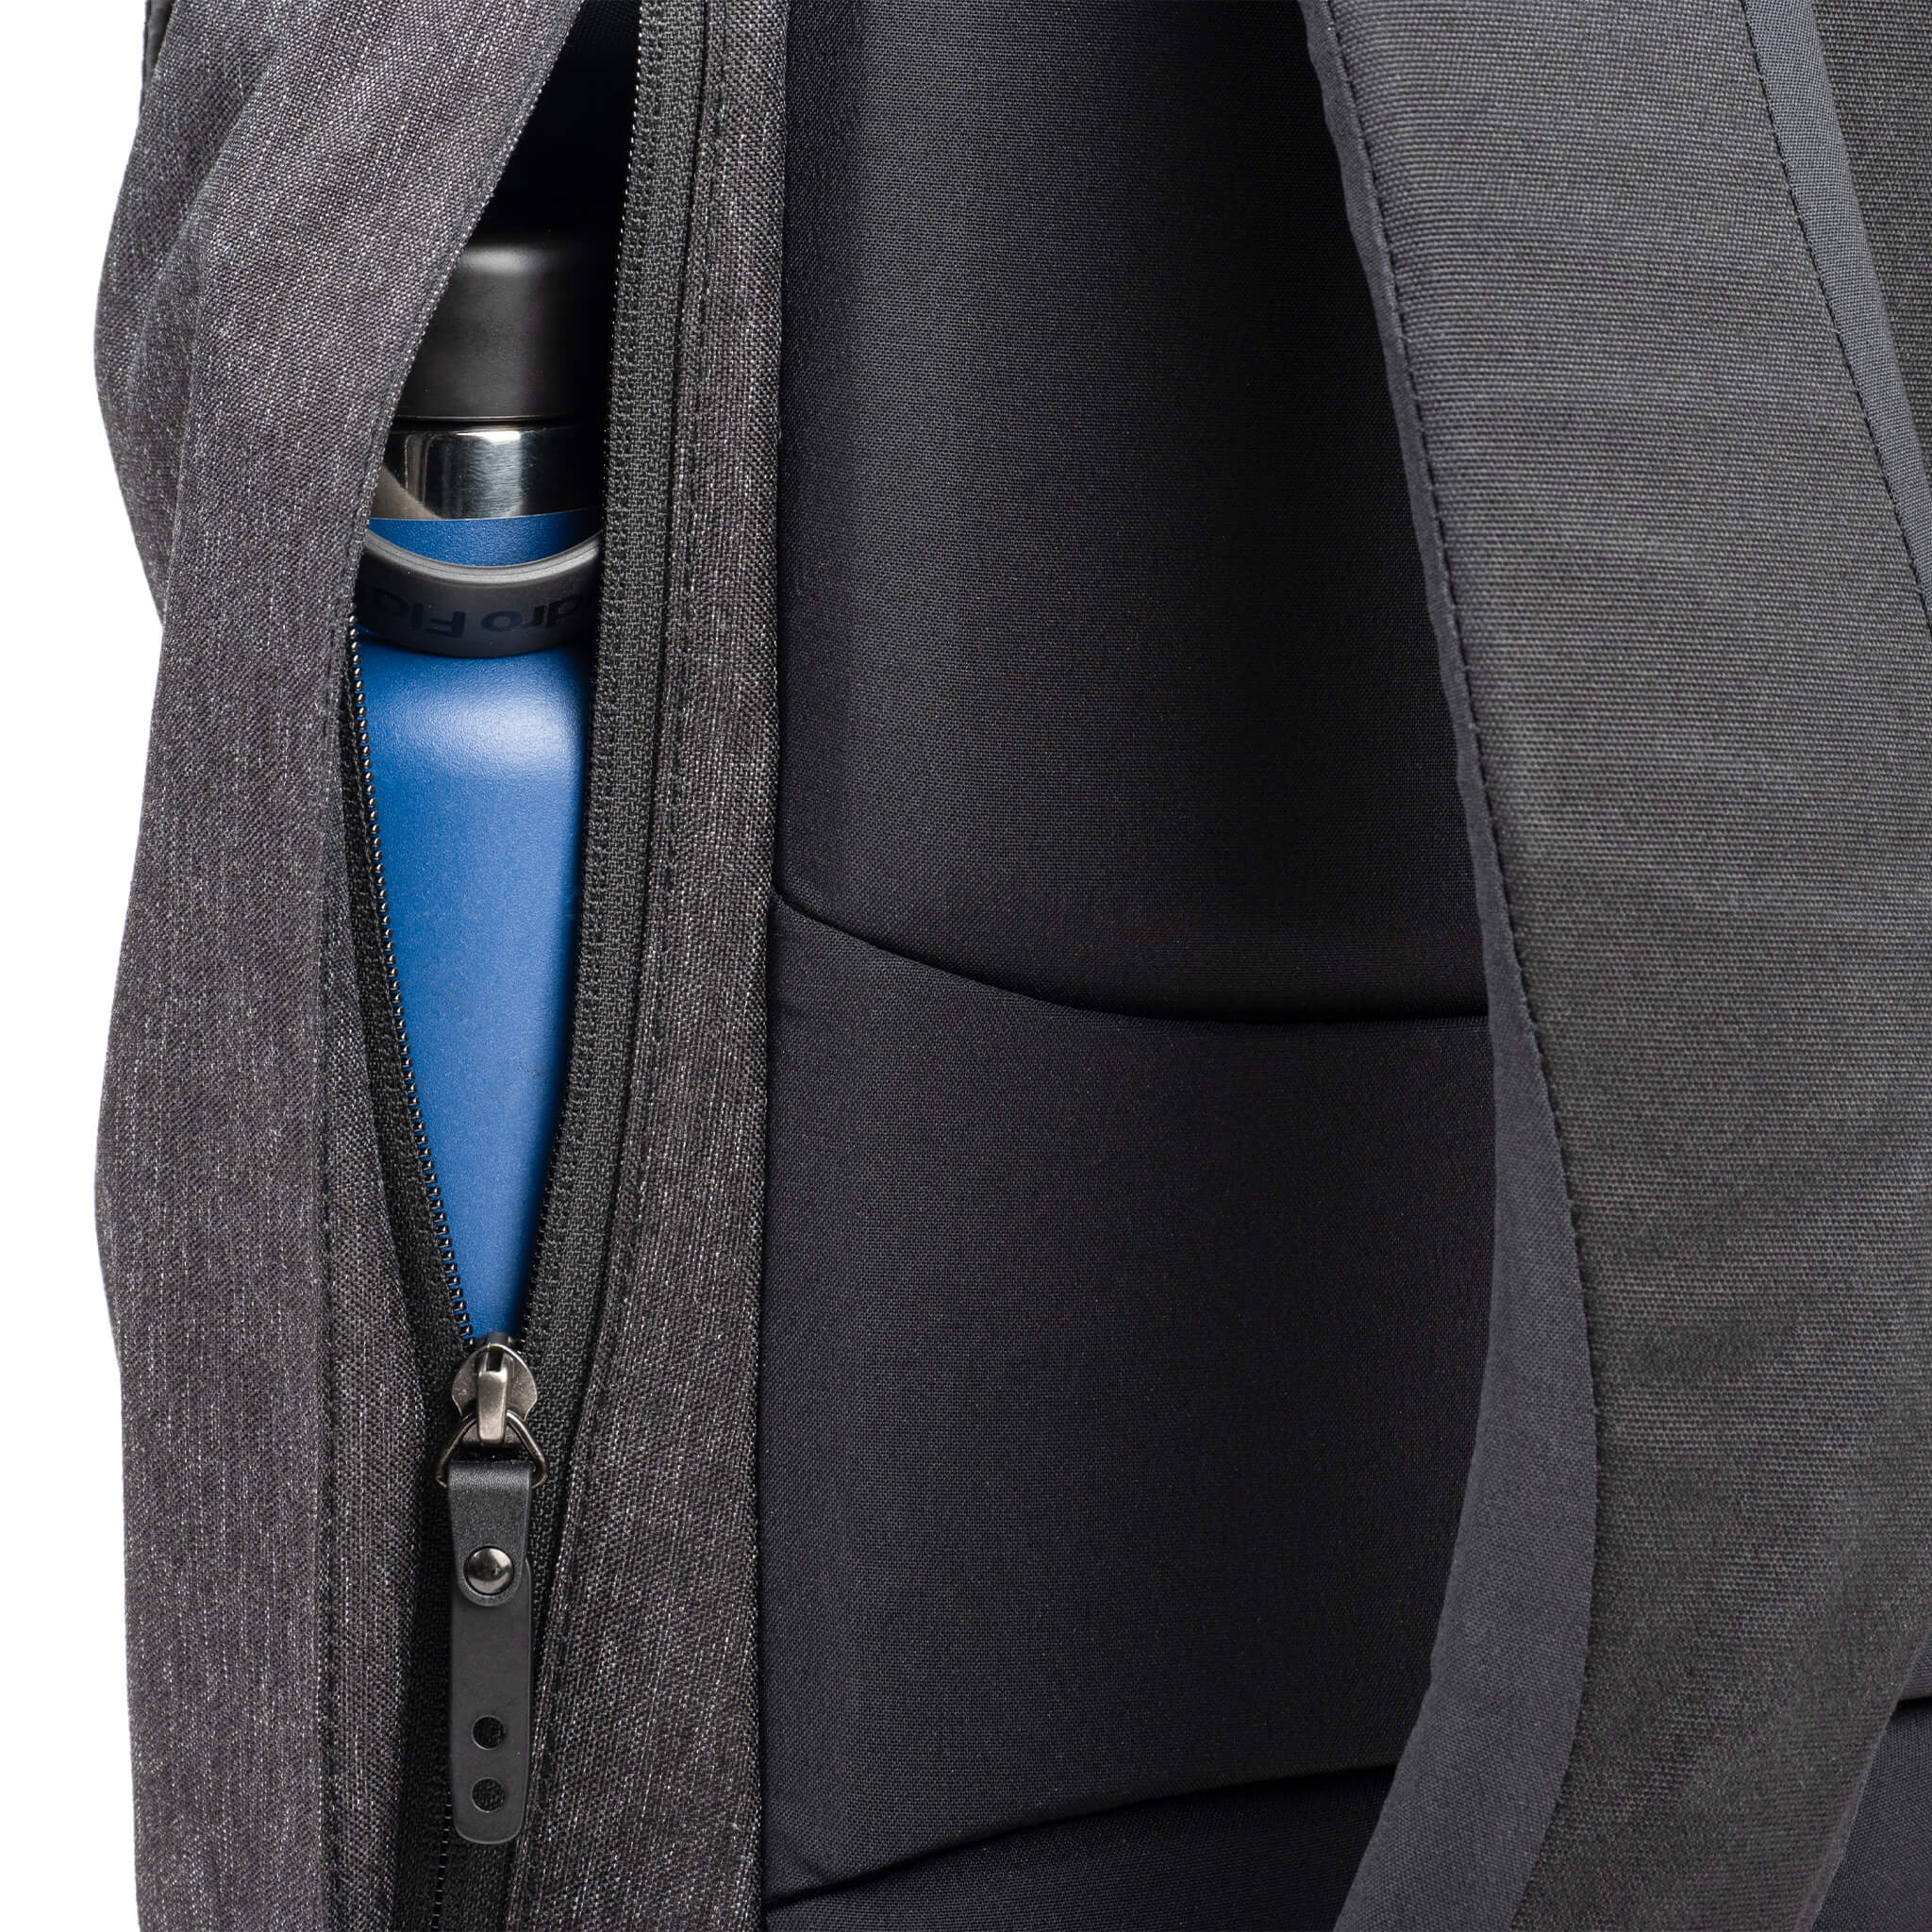 Zippered pocket on the right fits everything from light jacket to a water bottle (This pocket is accessible while wearing the pack)